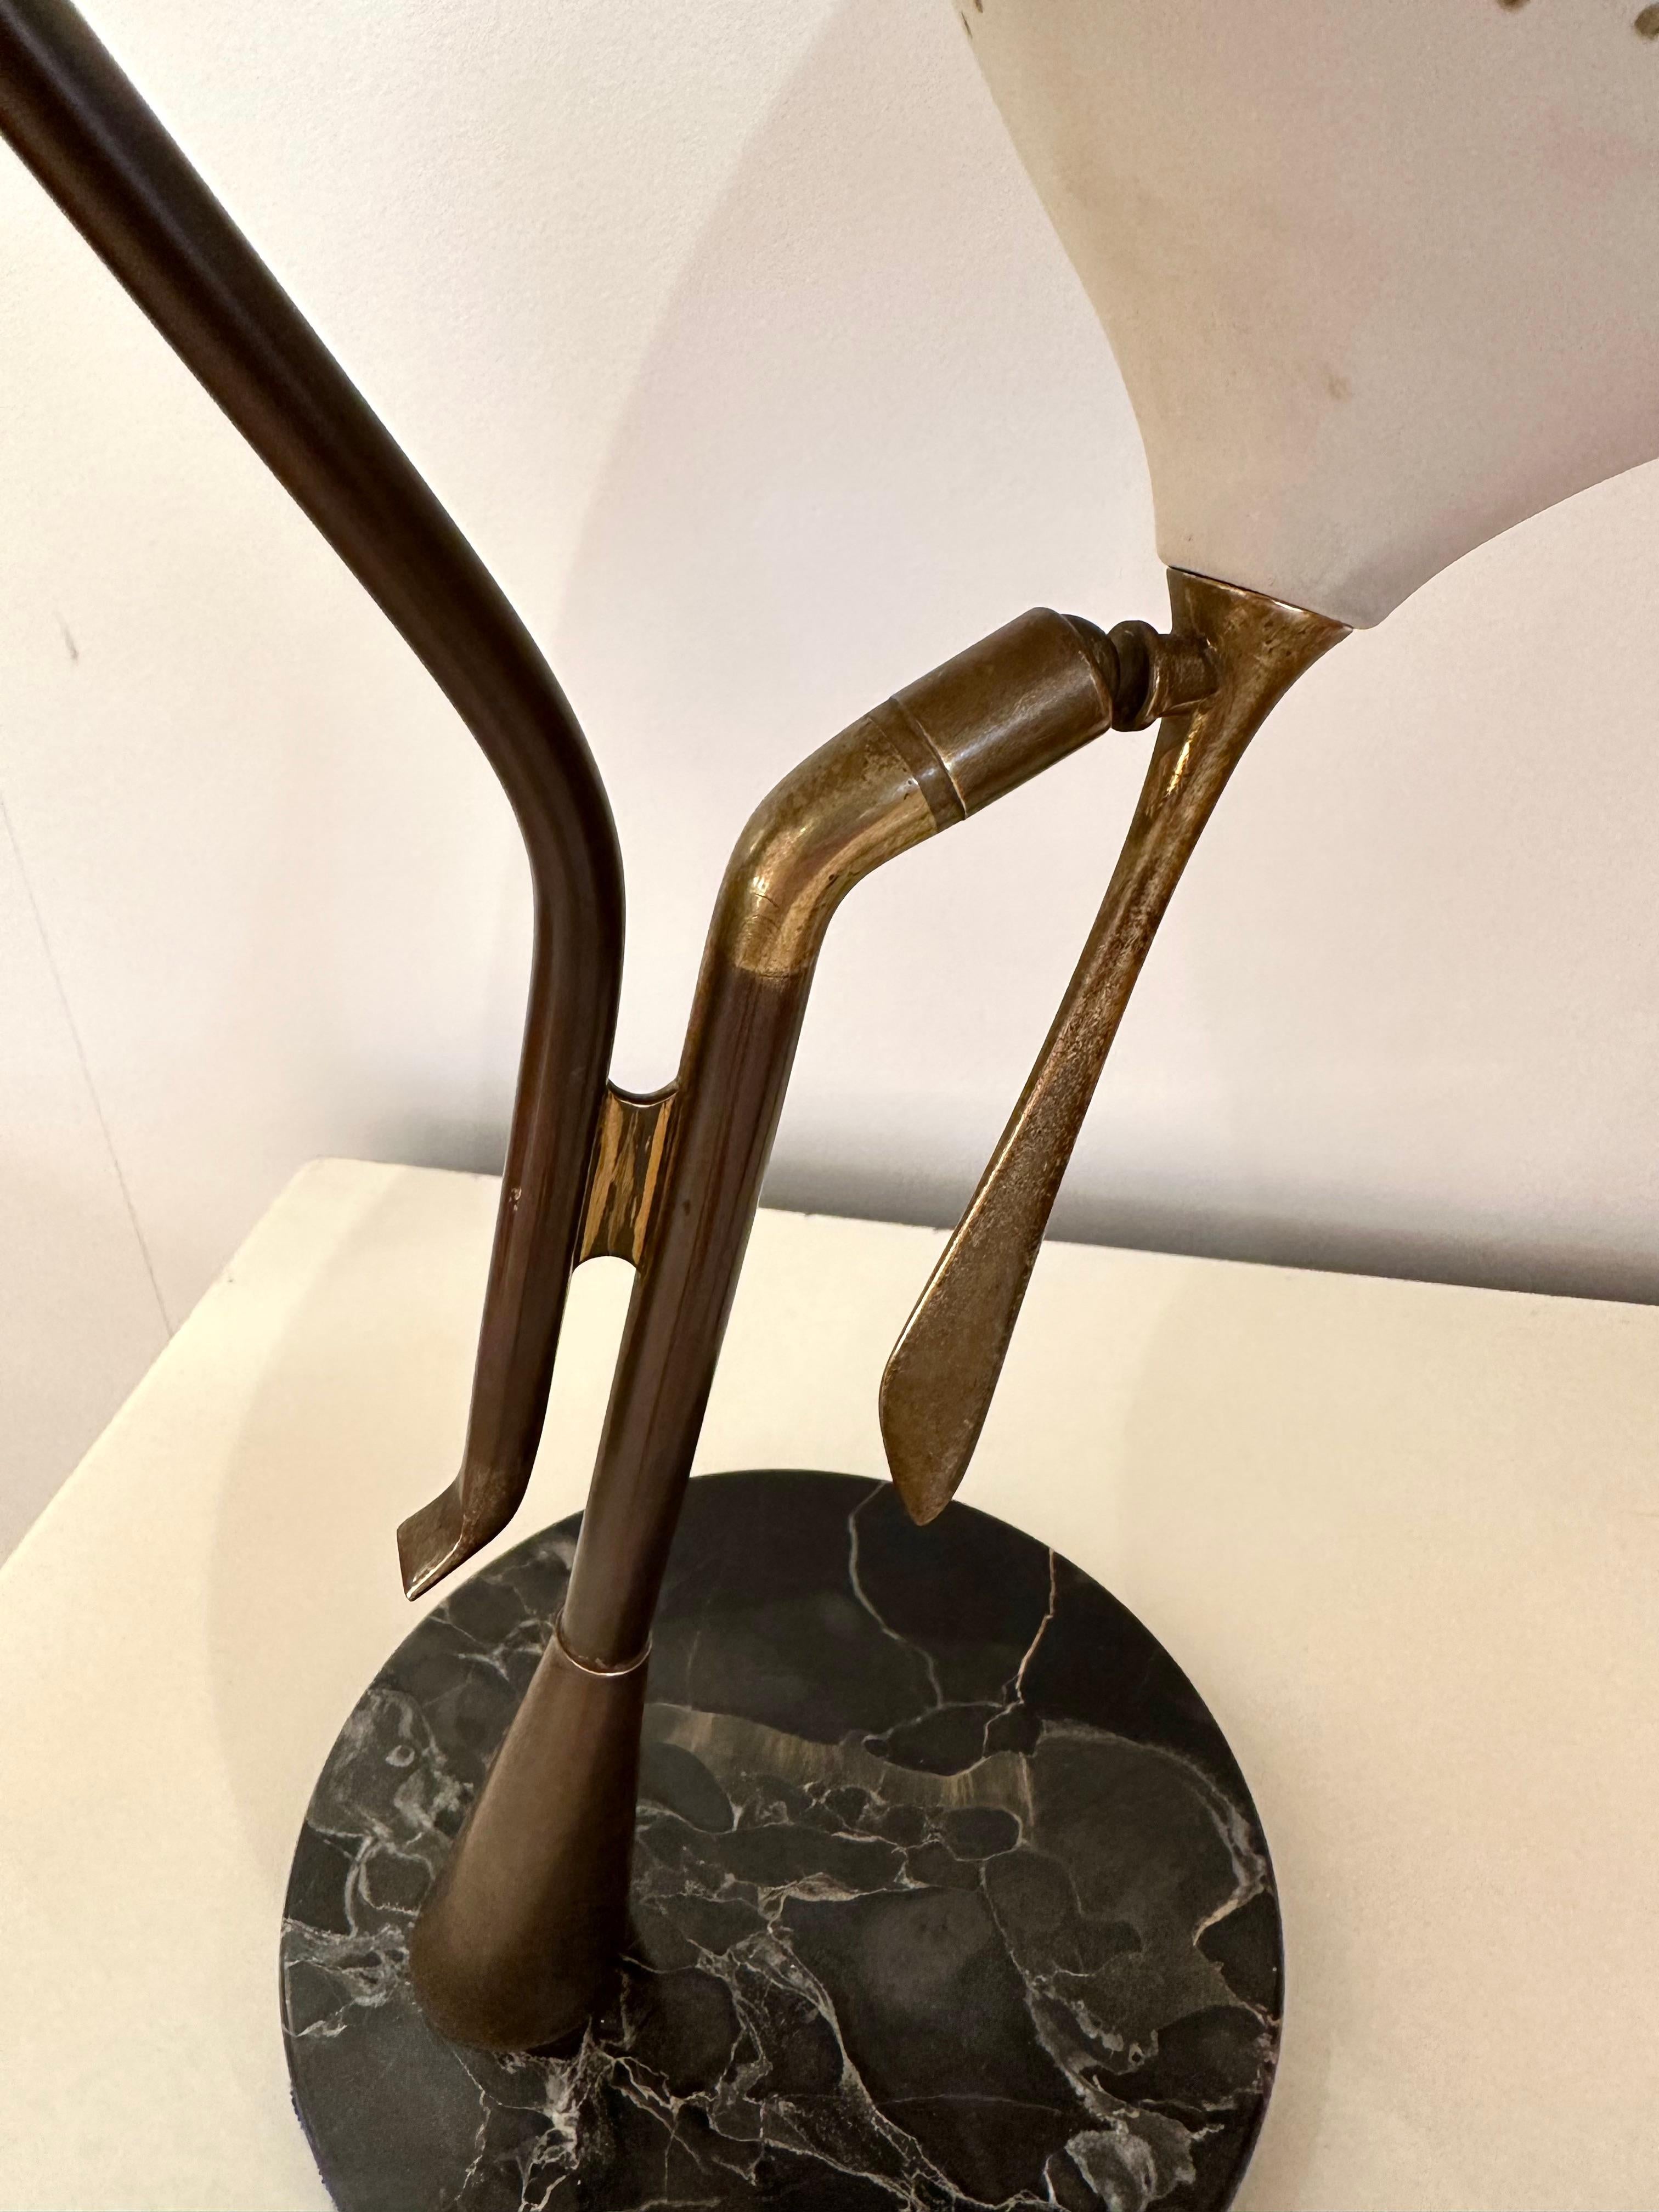 Midcentury Desk Lamp Painted Metal, Brass, Marble by Lumen, Italy, 1950s For Sale 5